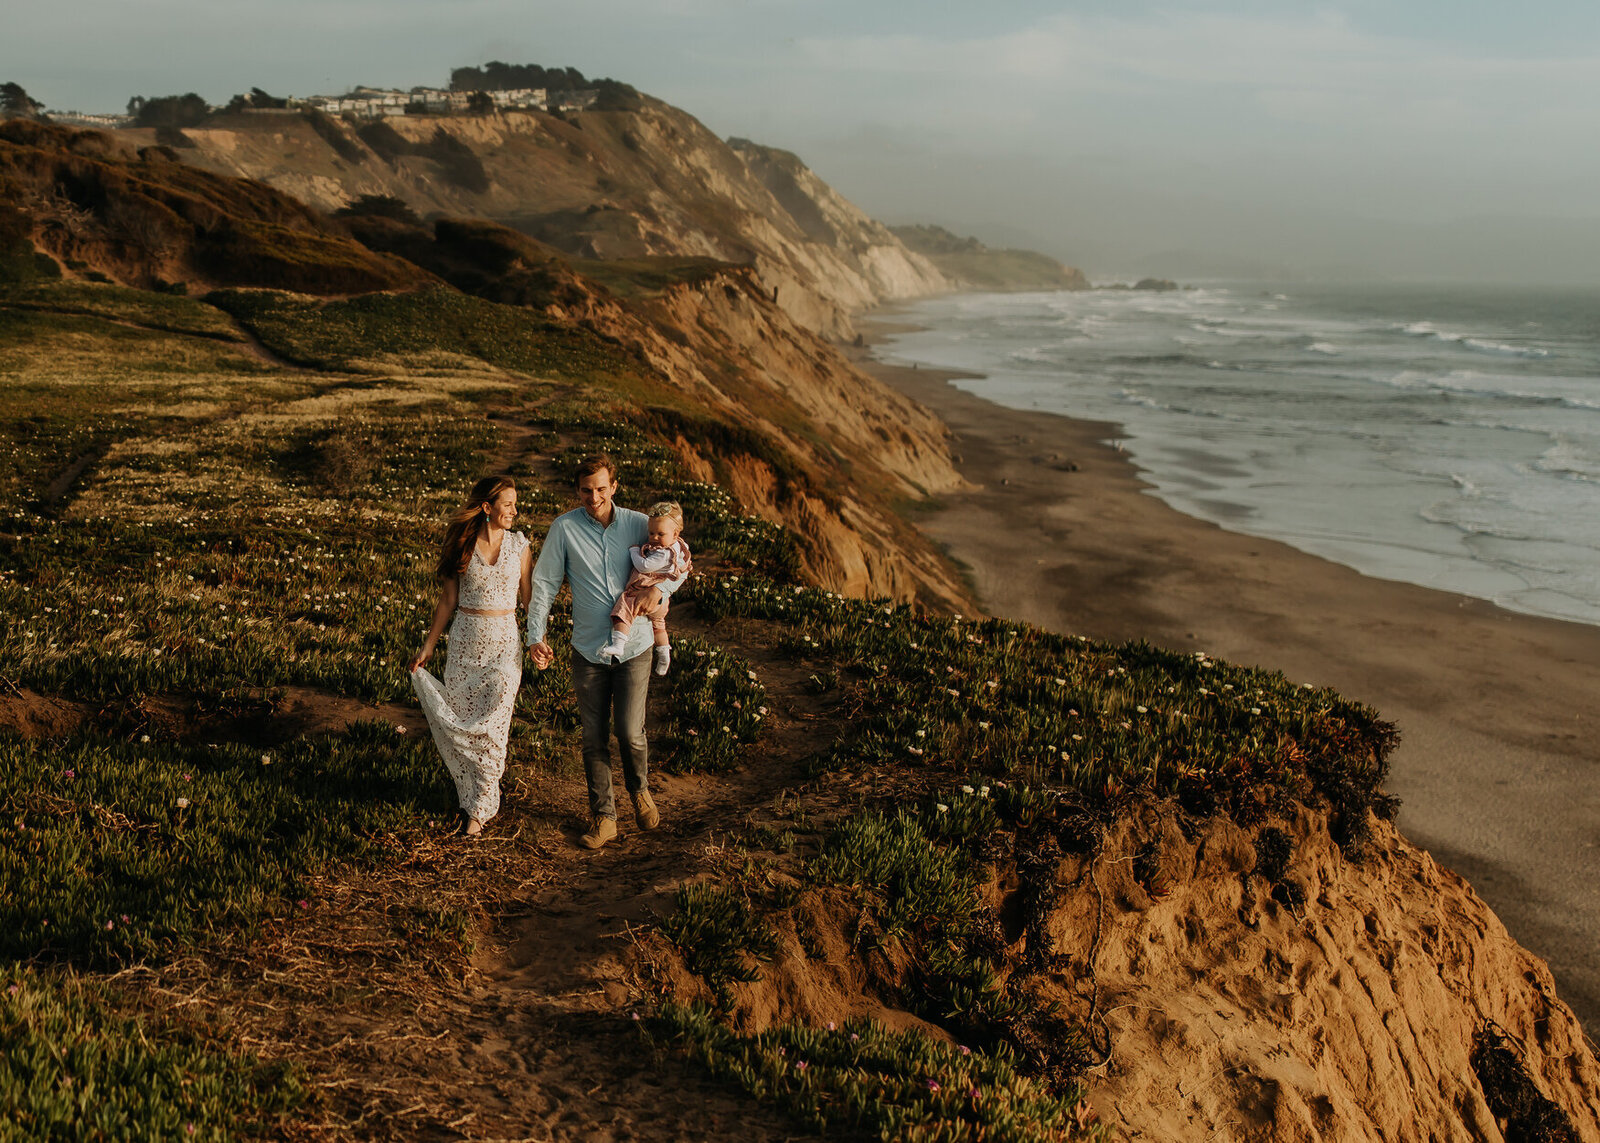 Family walks along California coastal bluffs during lifestyle photography session